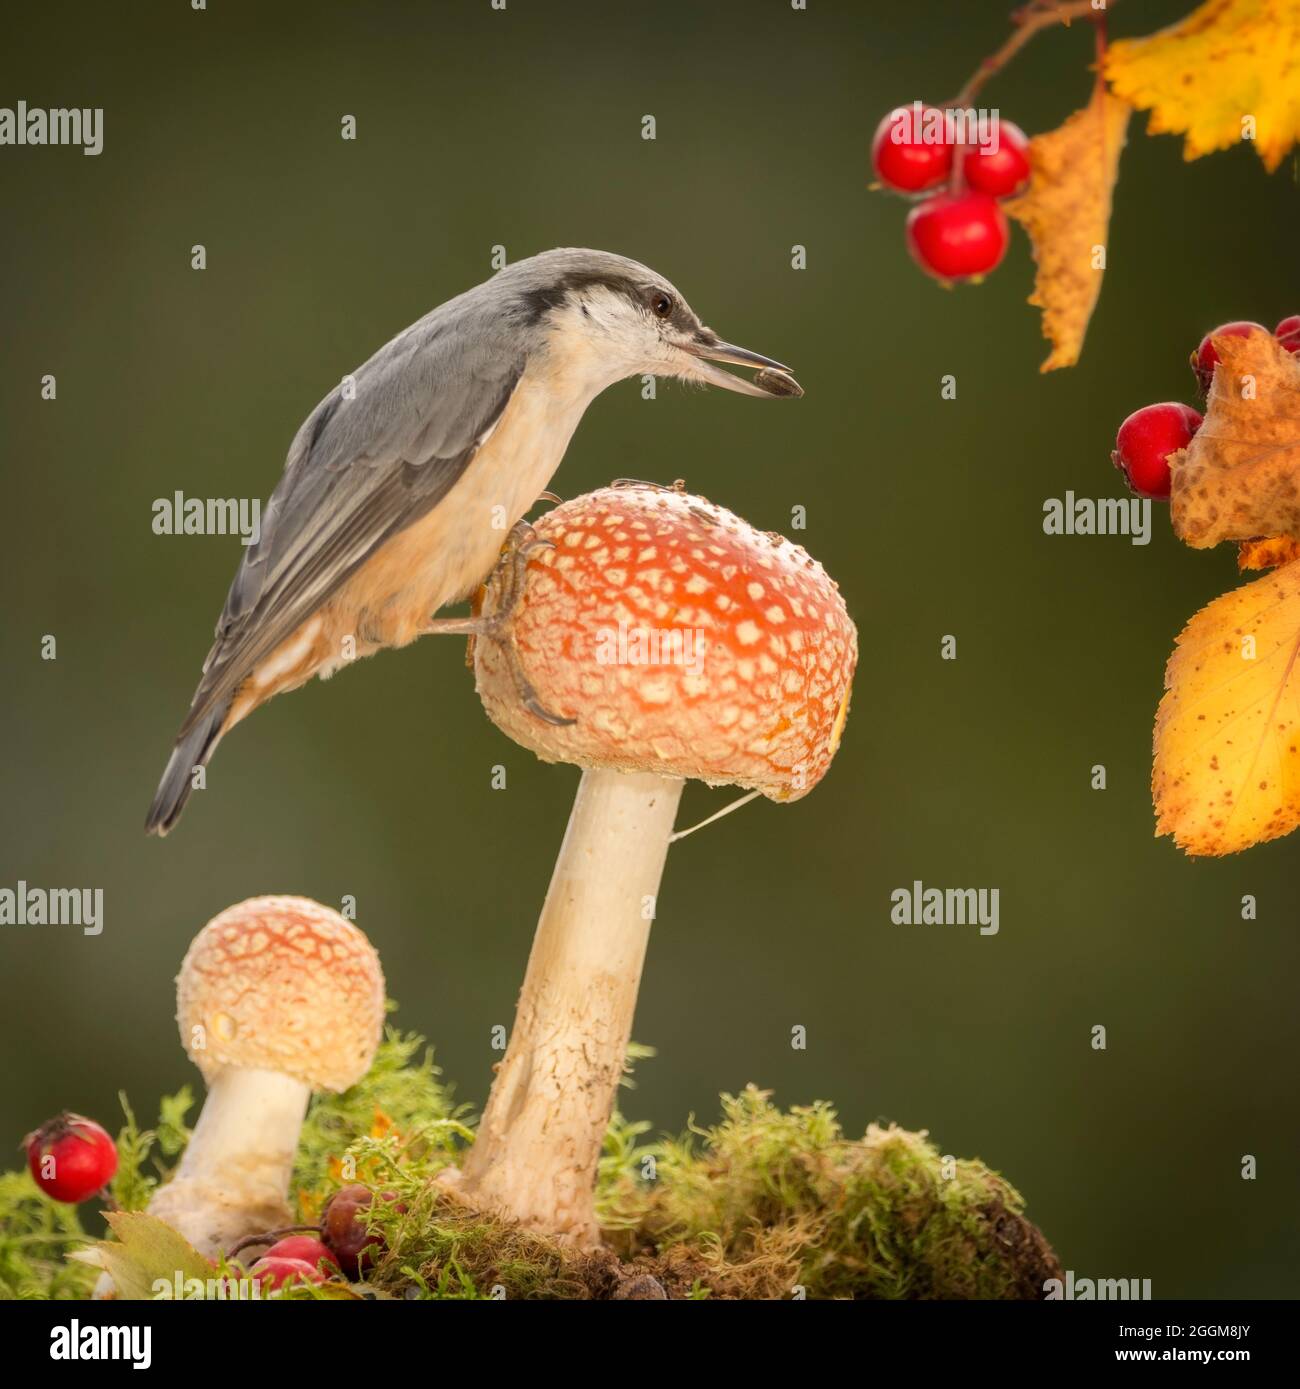 nuthatch is standing on a mushroom Stock Photo